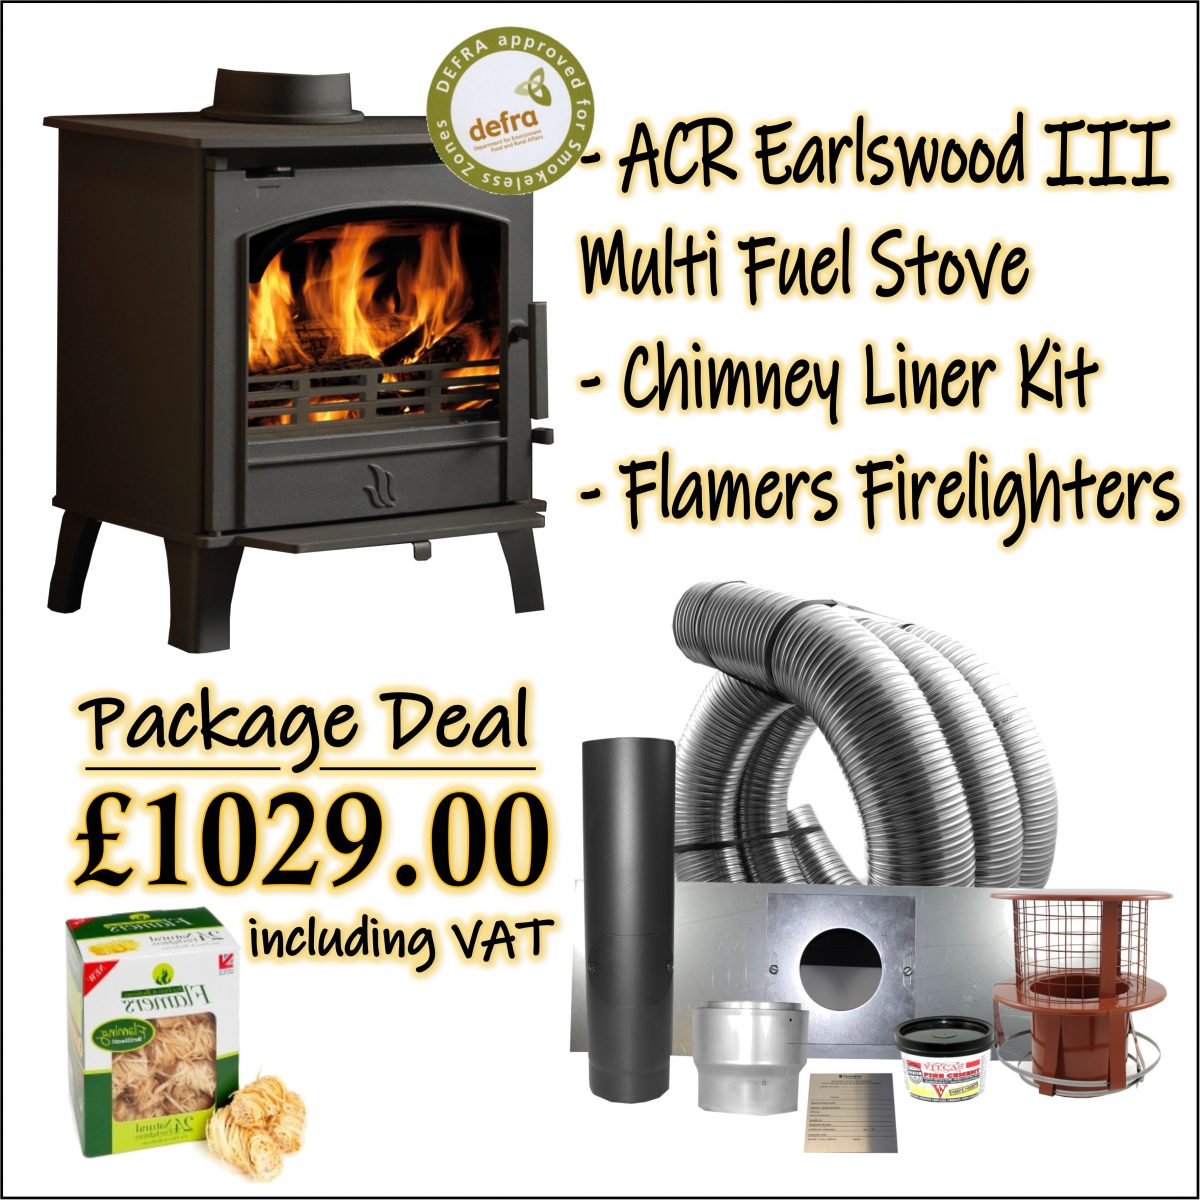 ACR Earlswood III Stove Package Deal